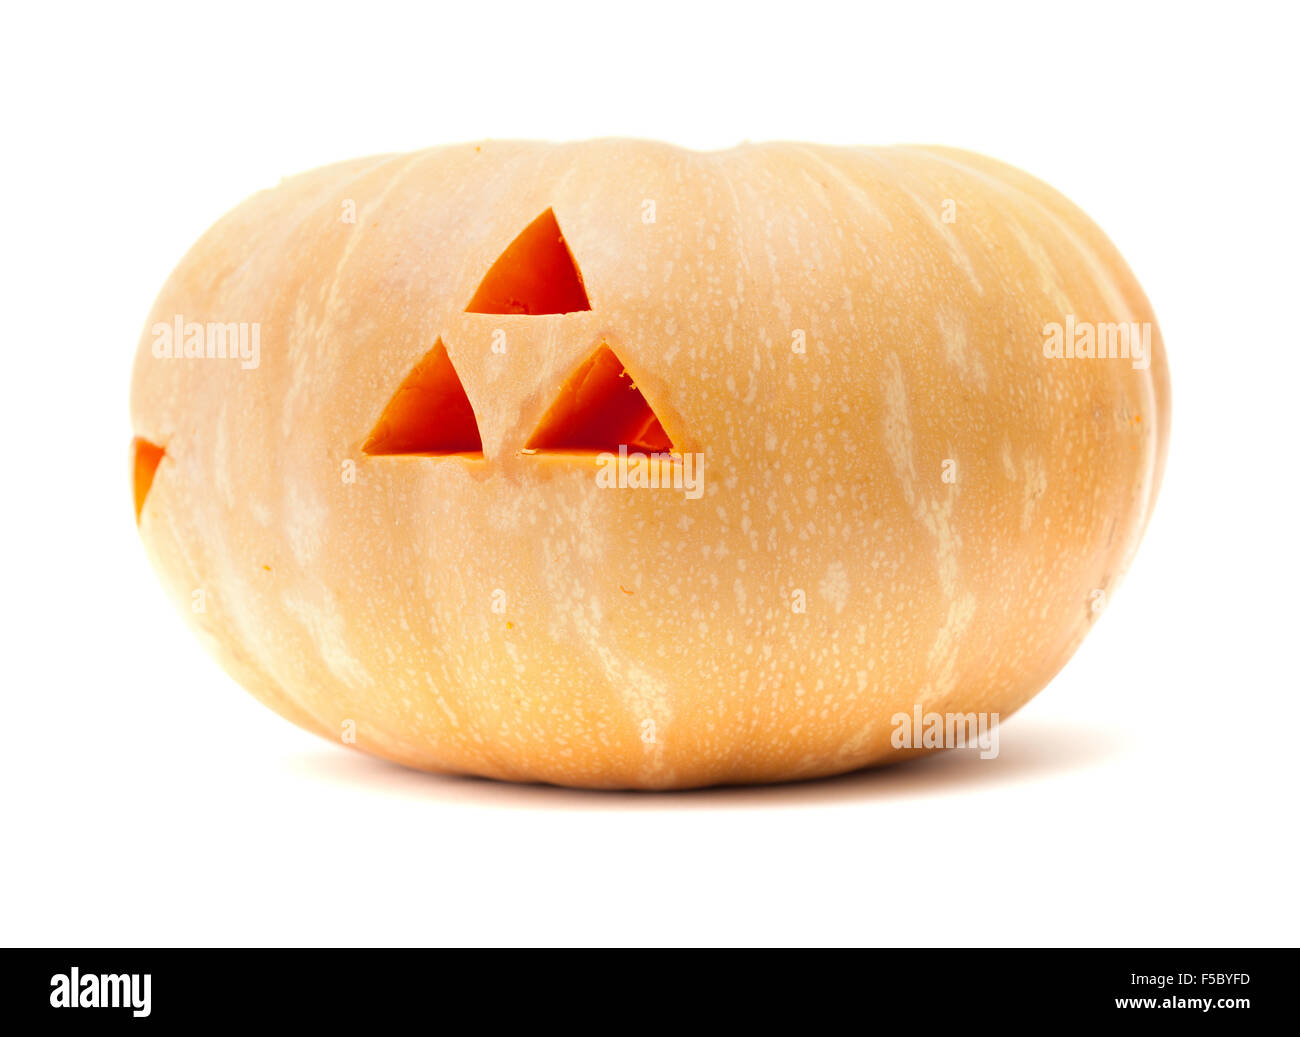 Halloween pumpkin guanche-style, with typical simple ornaments of triangles and spirals Stock Photo